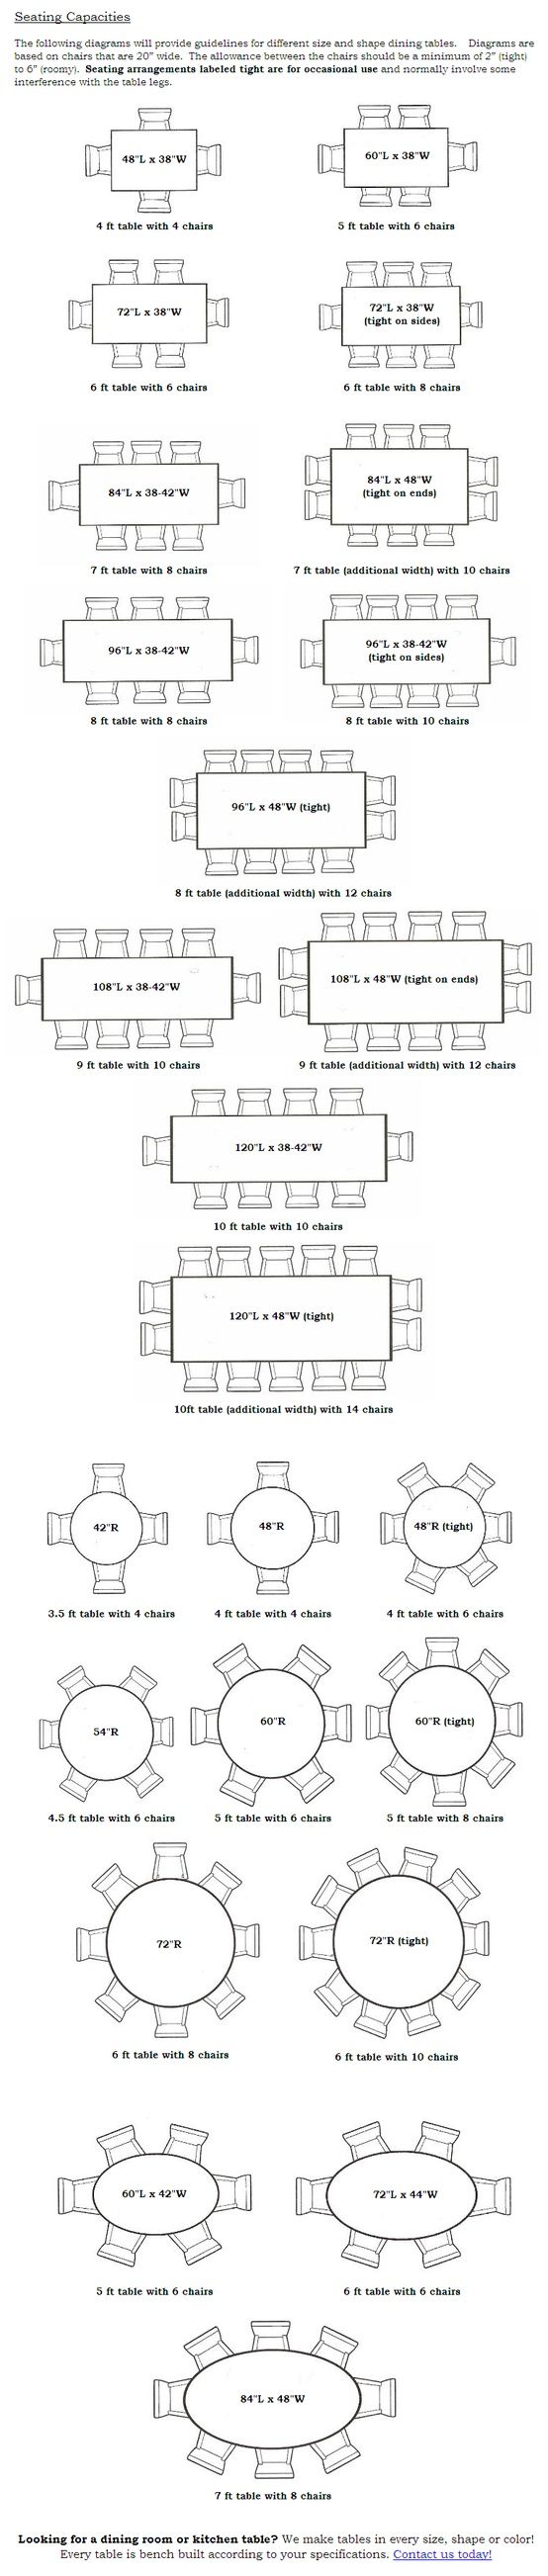 Dining Table seating capacities chart by size and shape